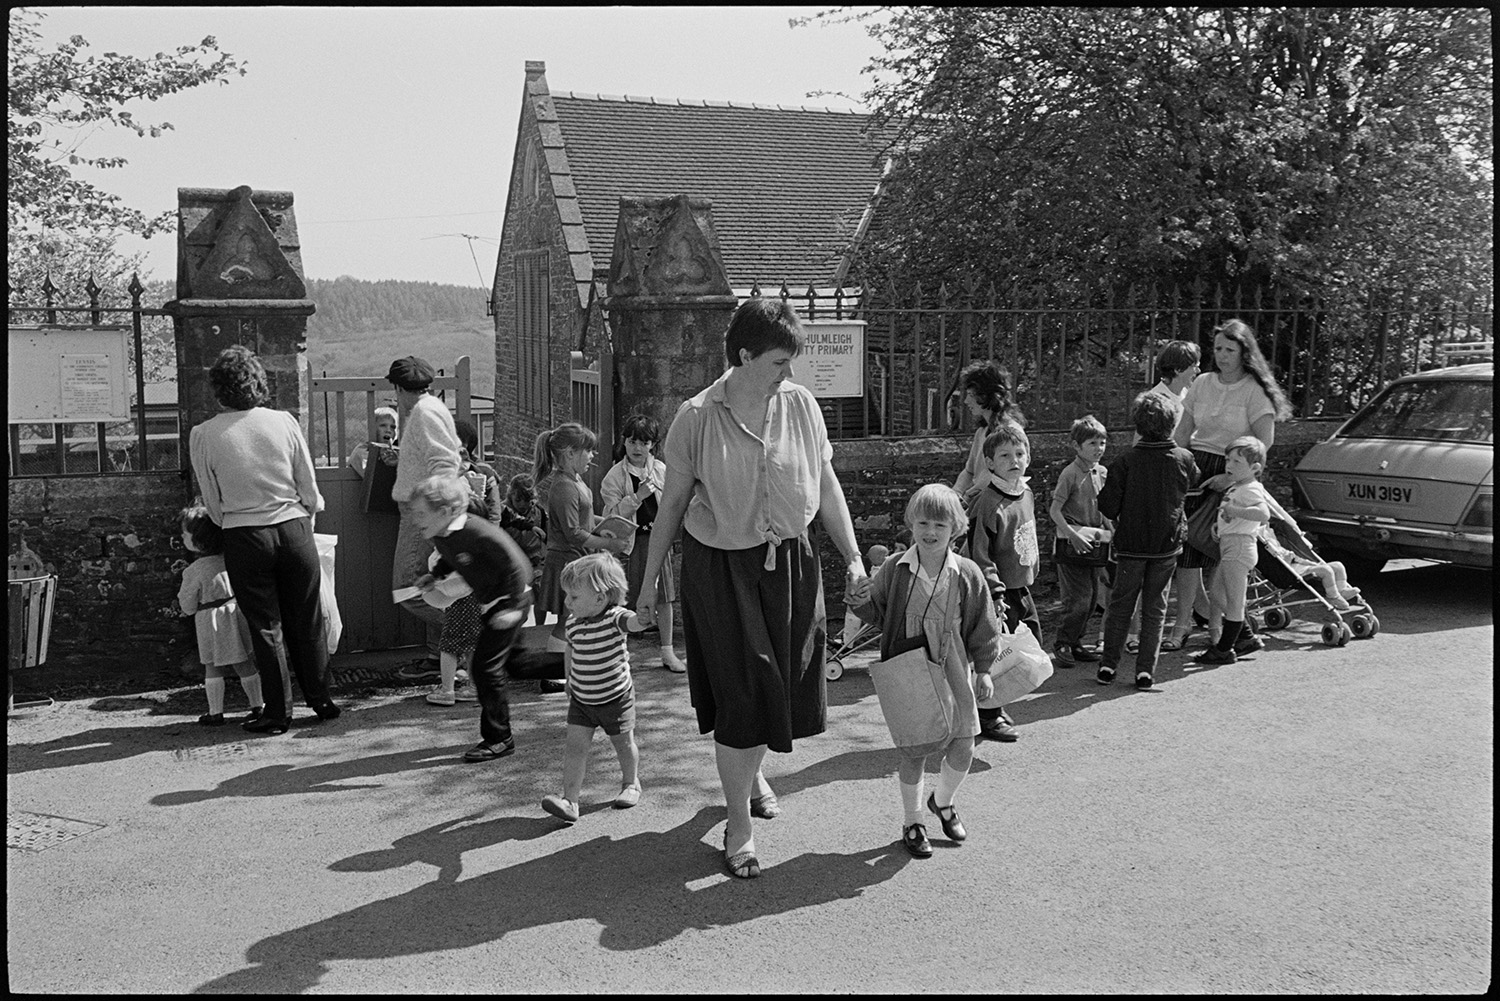 Children coming out of school. Going through cobbled streets in crocodile. Church tower.
[Mothers and women collecting children at the school gate, at Chulmleigh Primary School.]